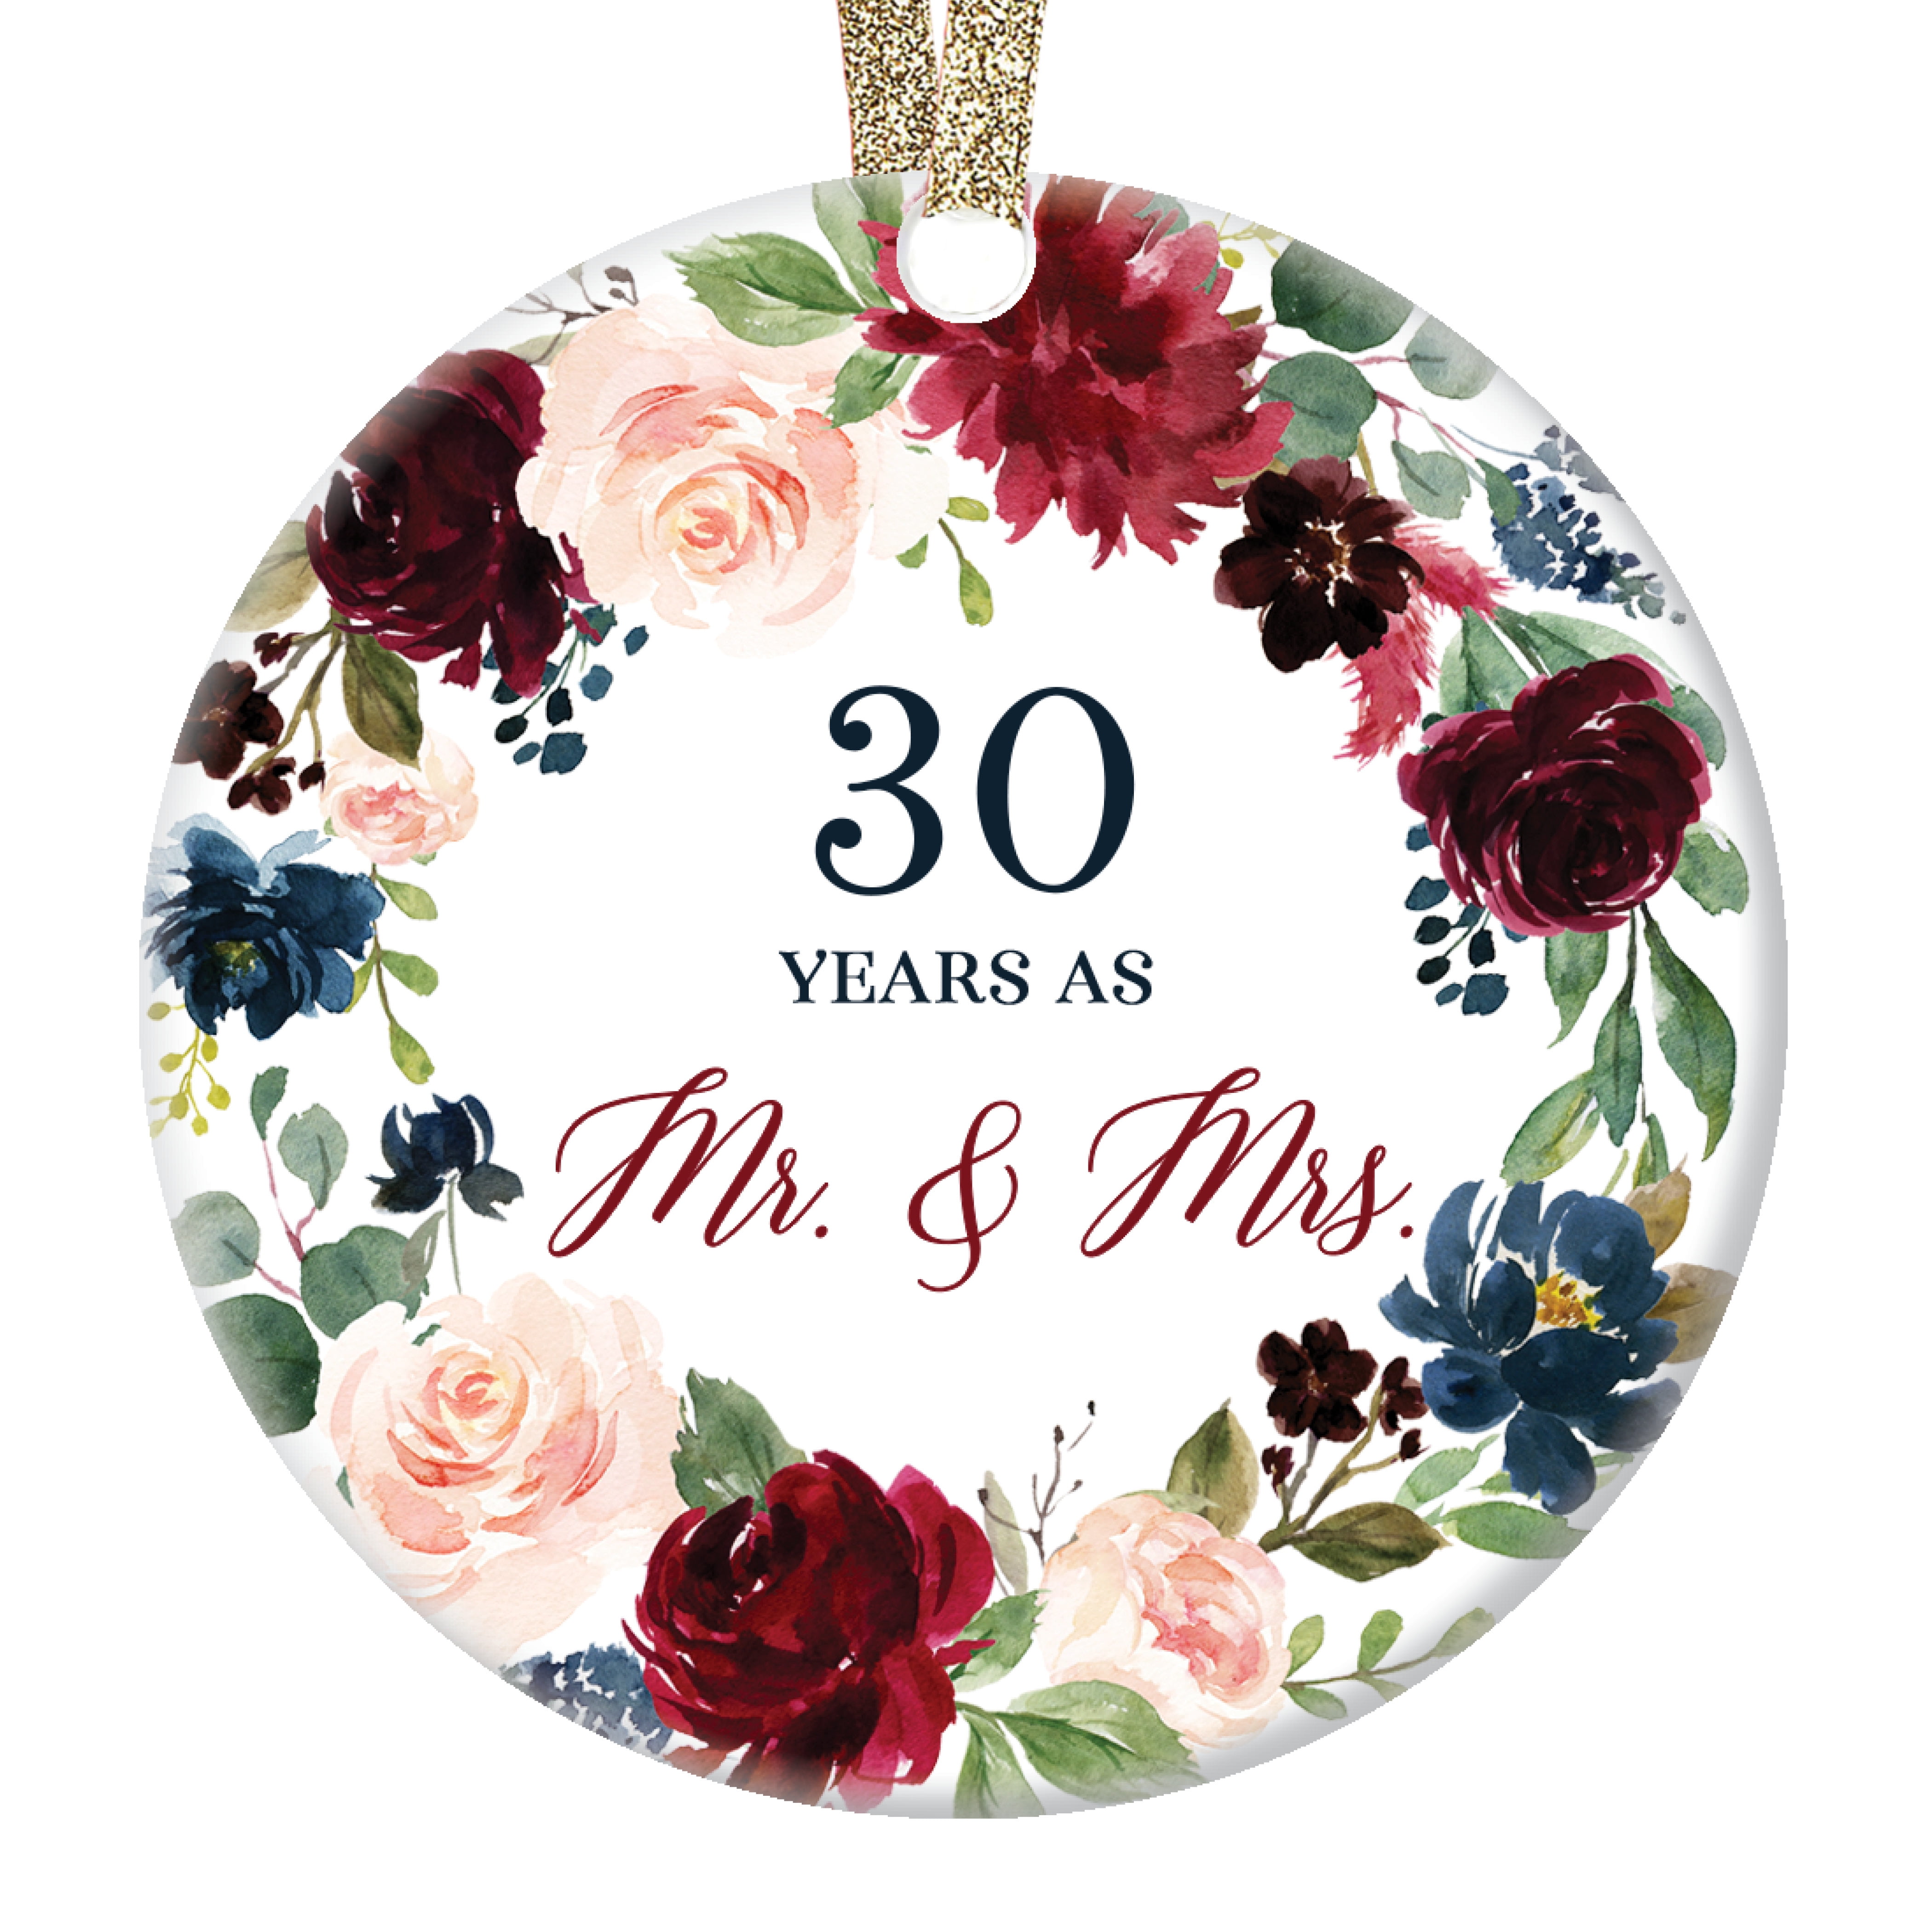 Gifts for Couples & Mrs 2021 Husband 2.85 in 30 Years As Mr Holiday Decoration Gift for 30th Wedding Anniversary Circle Ceramic Keepsake SARIUROS Christmas Ceramic Ornaments Wife